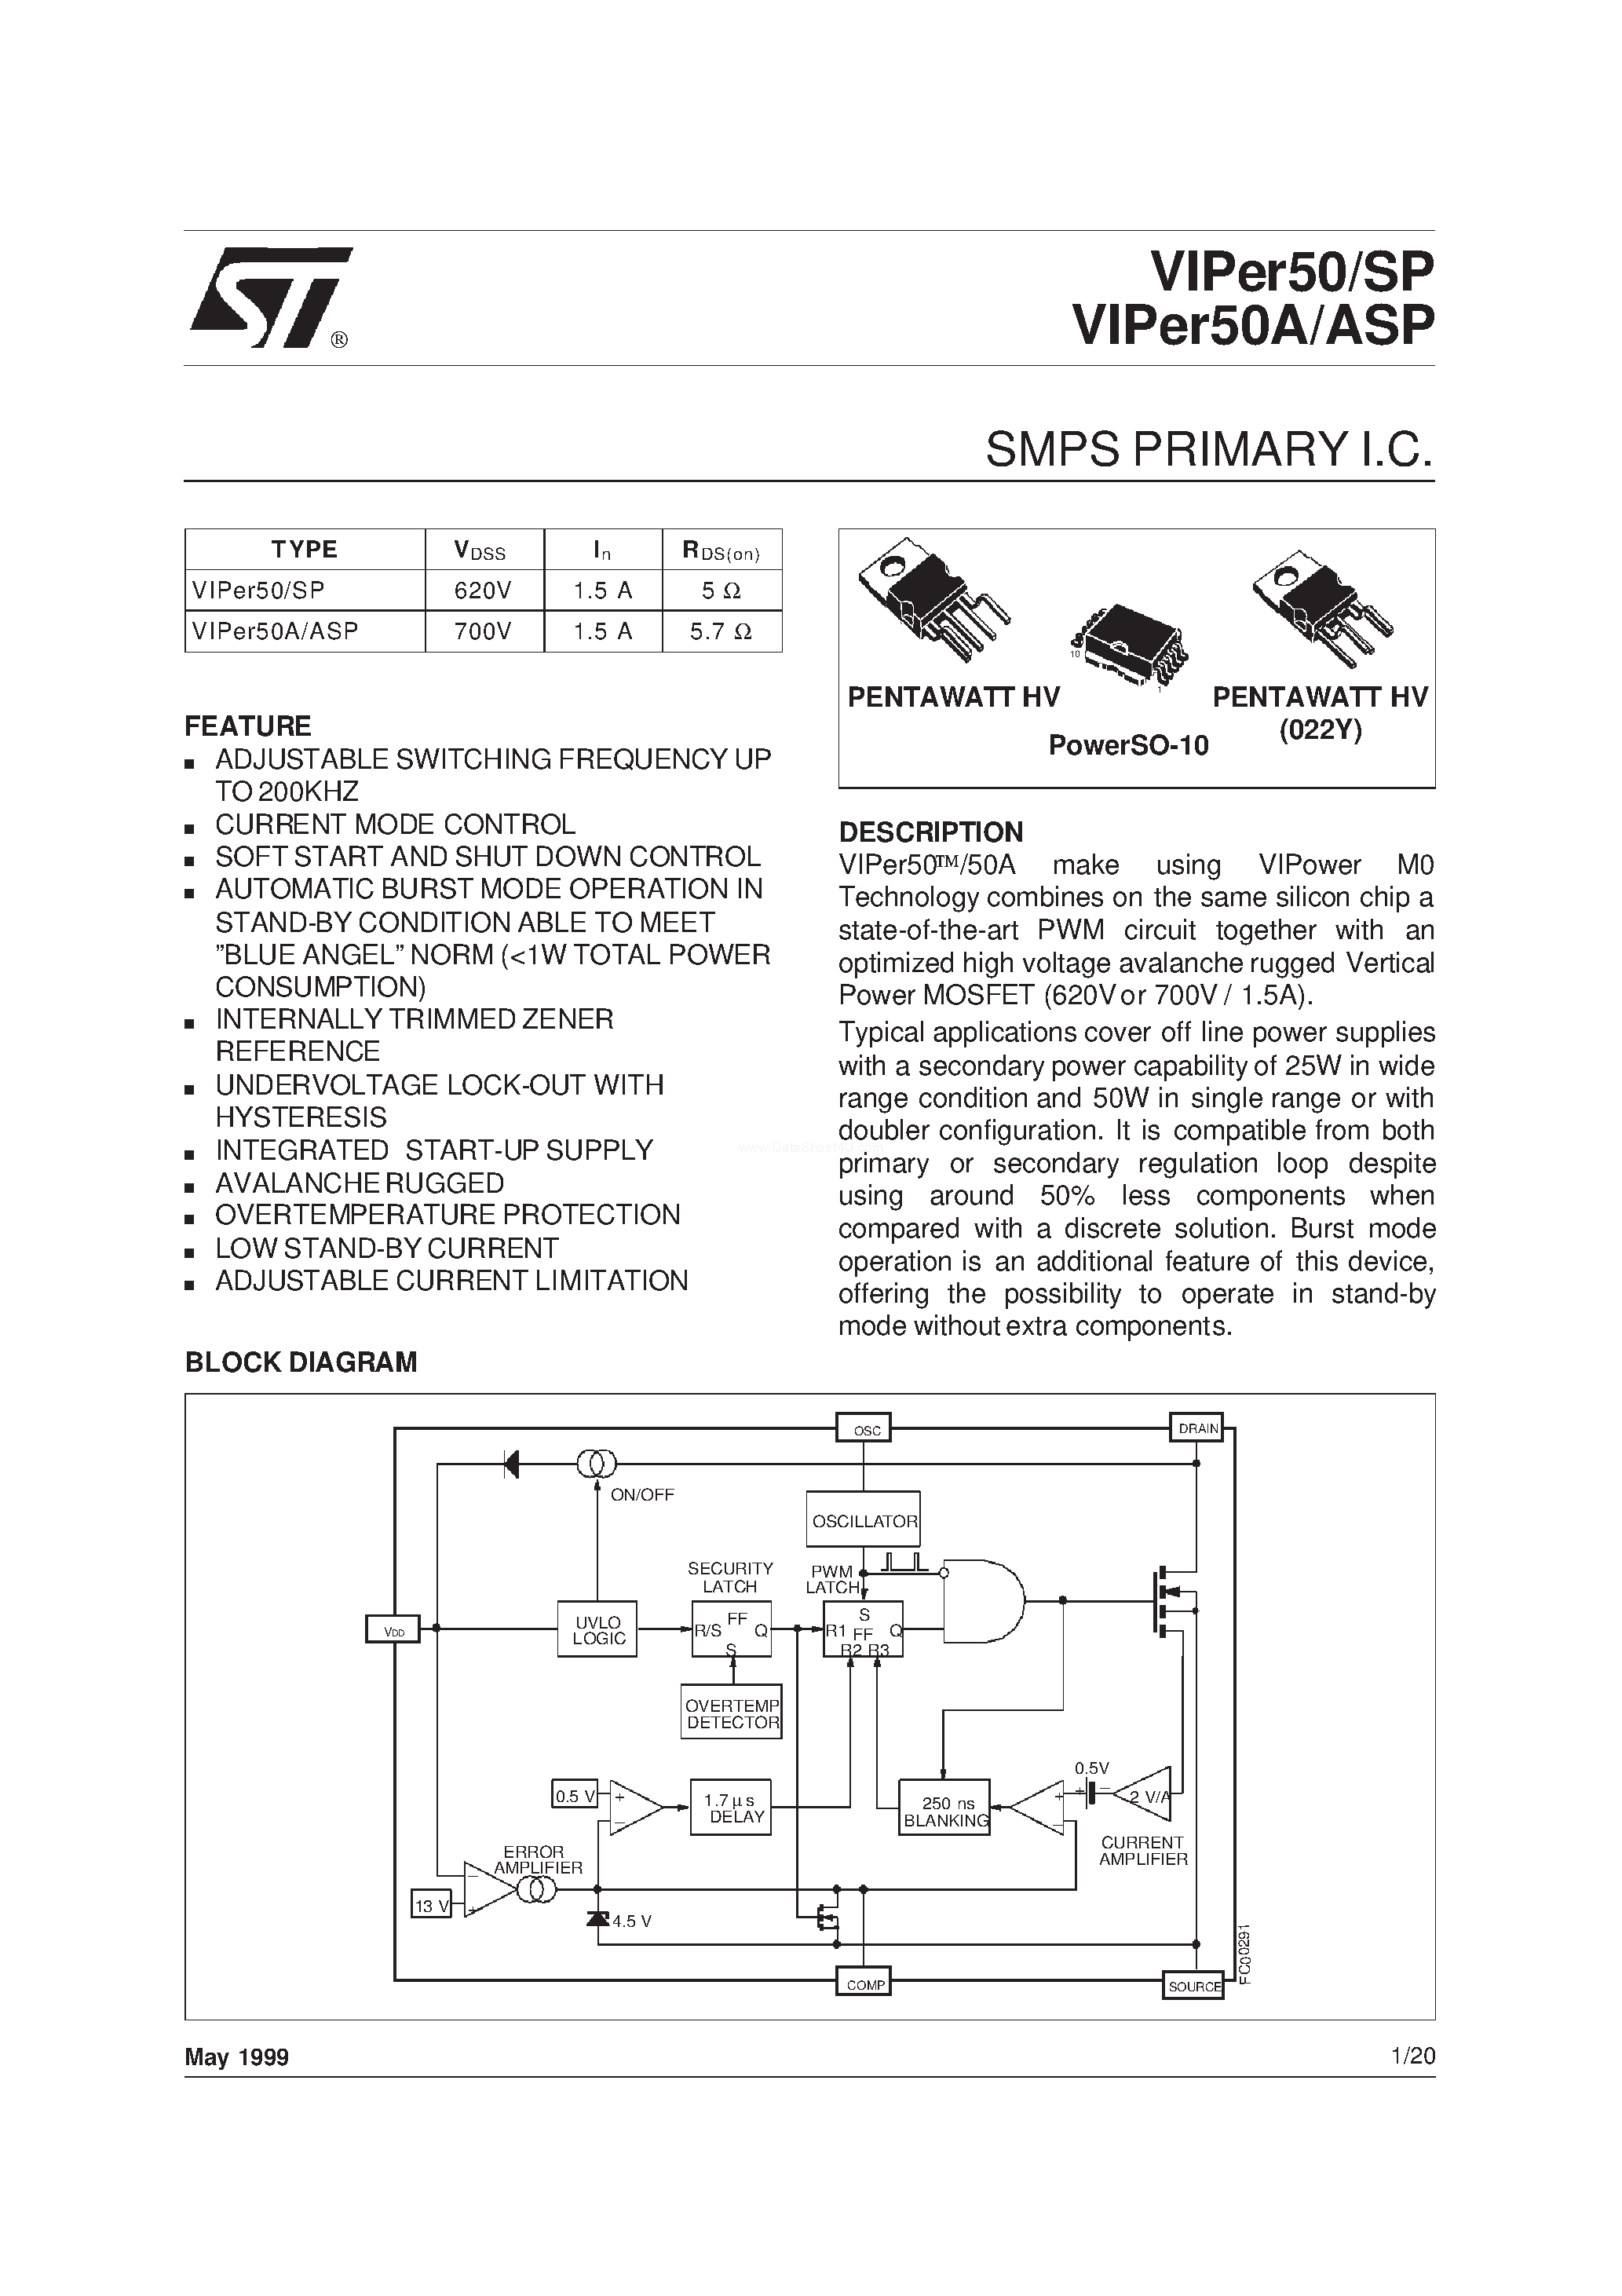 Datasheet VIPer50ASP - SMPS PRIMARY I.C. page 1